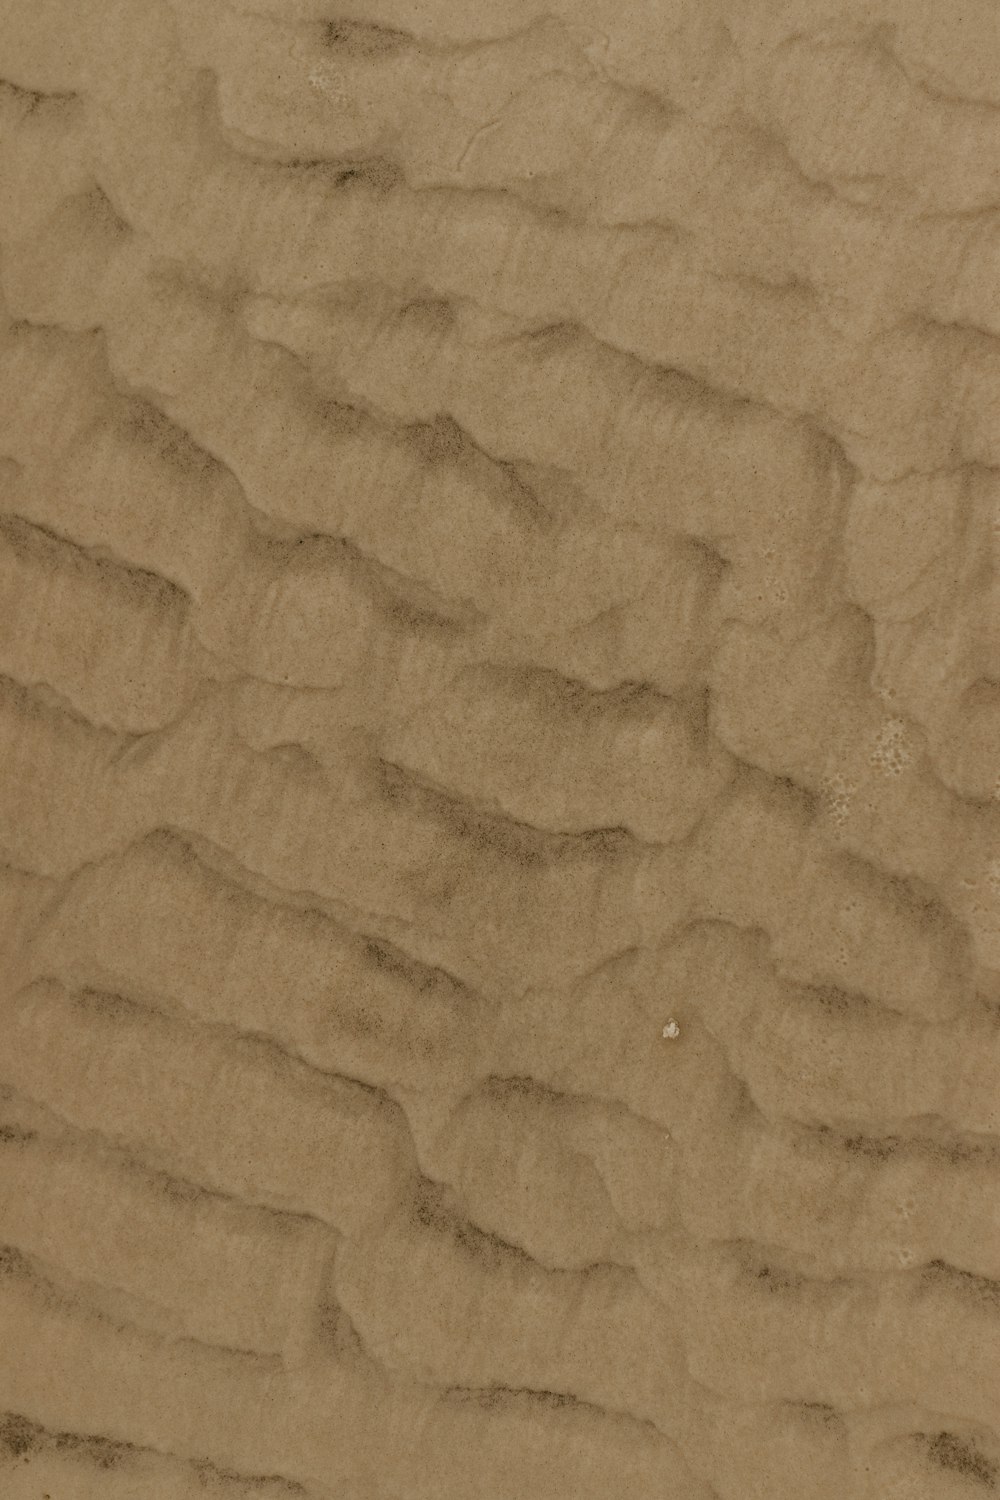 a close up of a sand dune with small waves